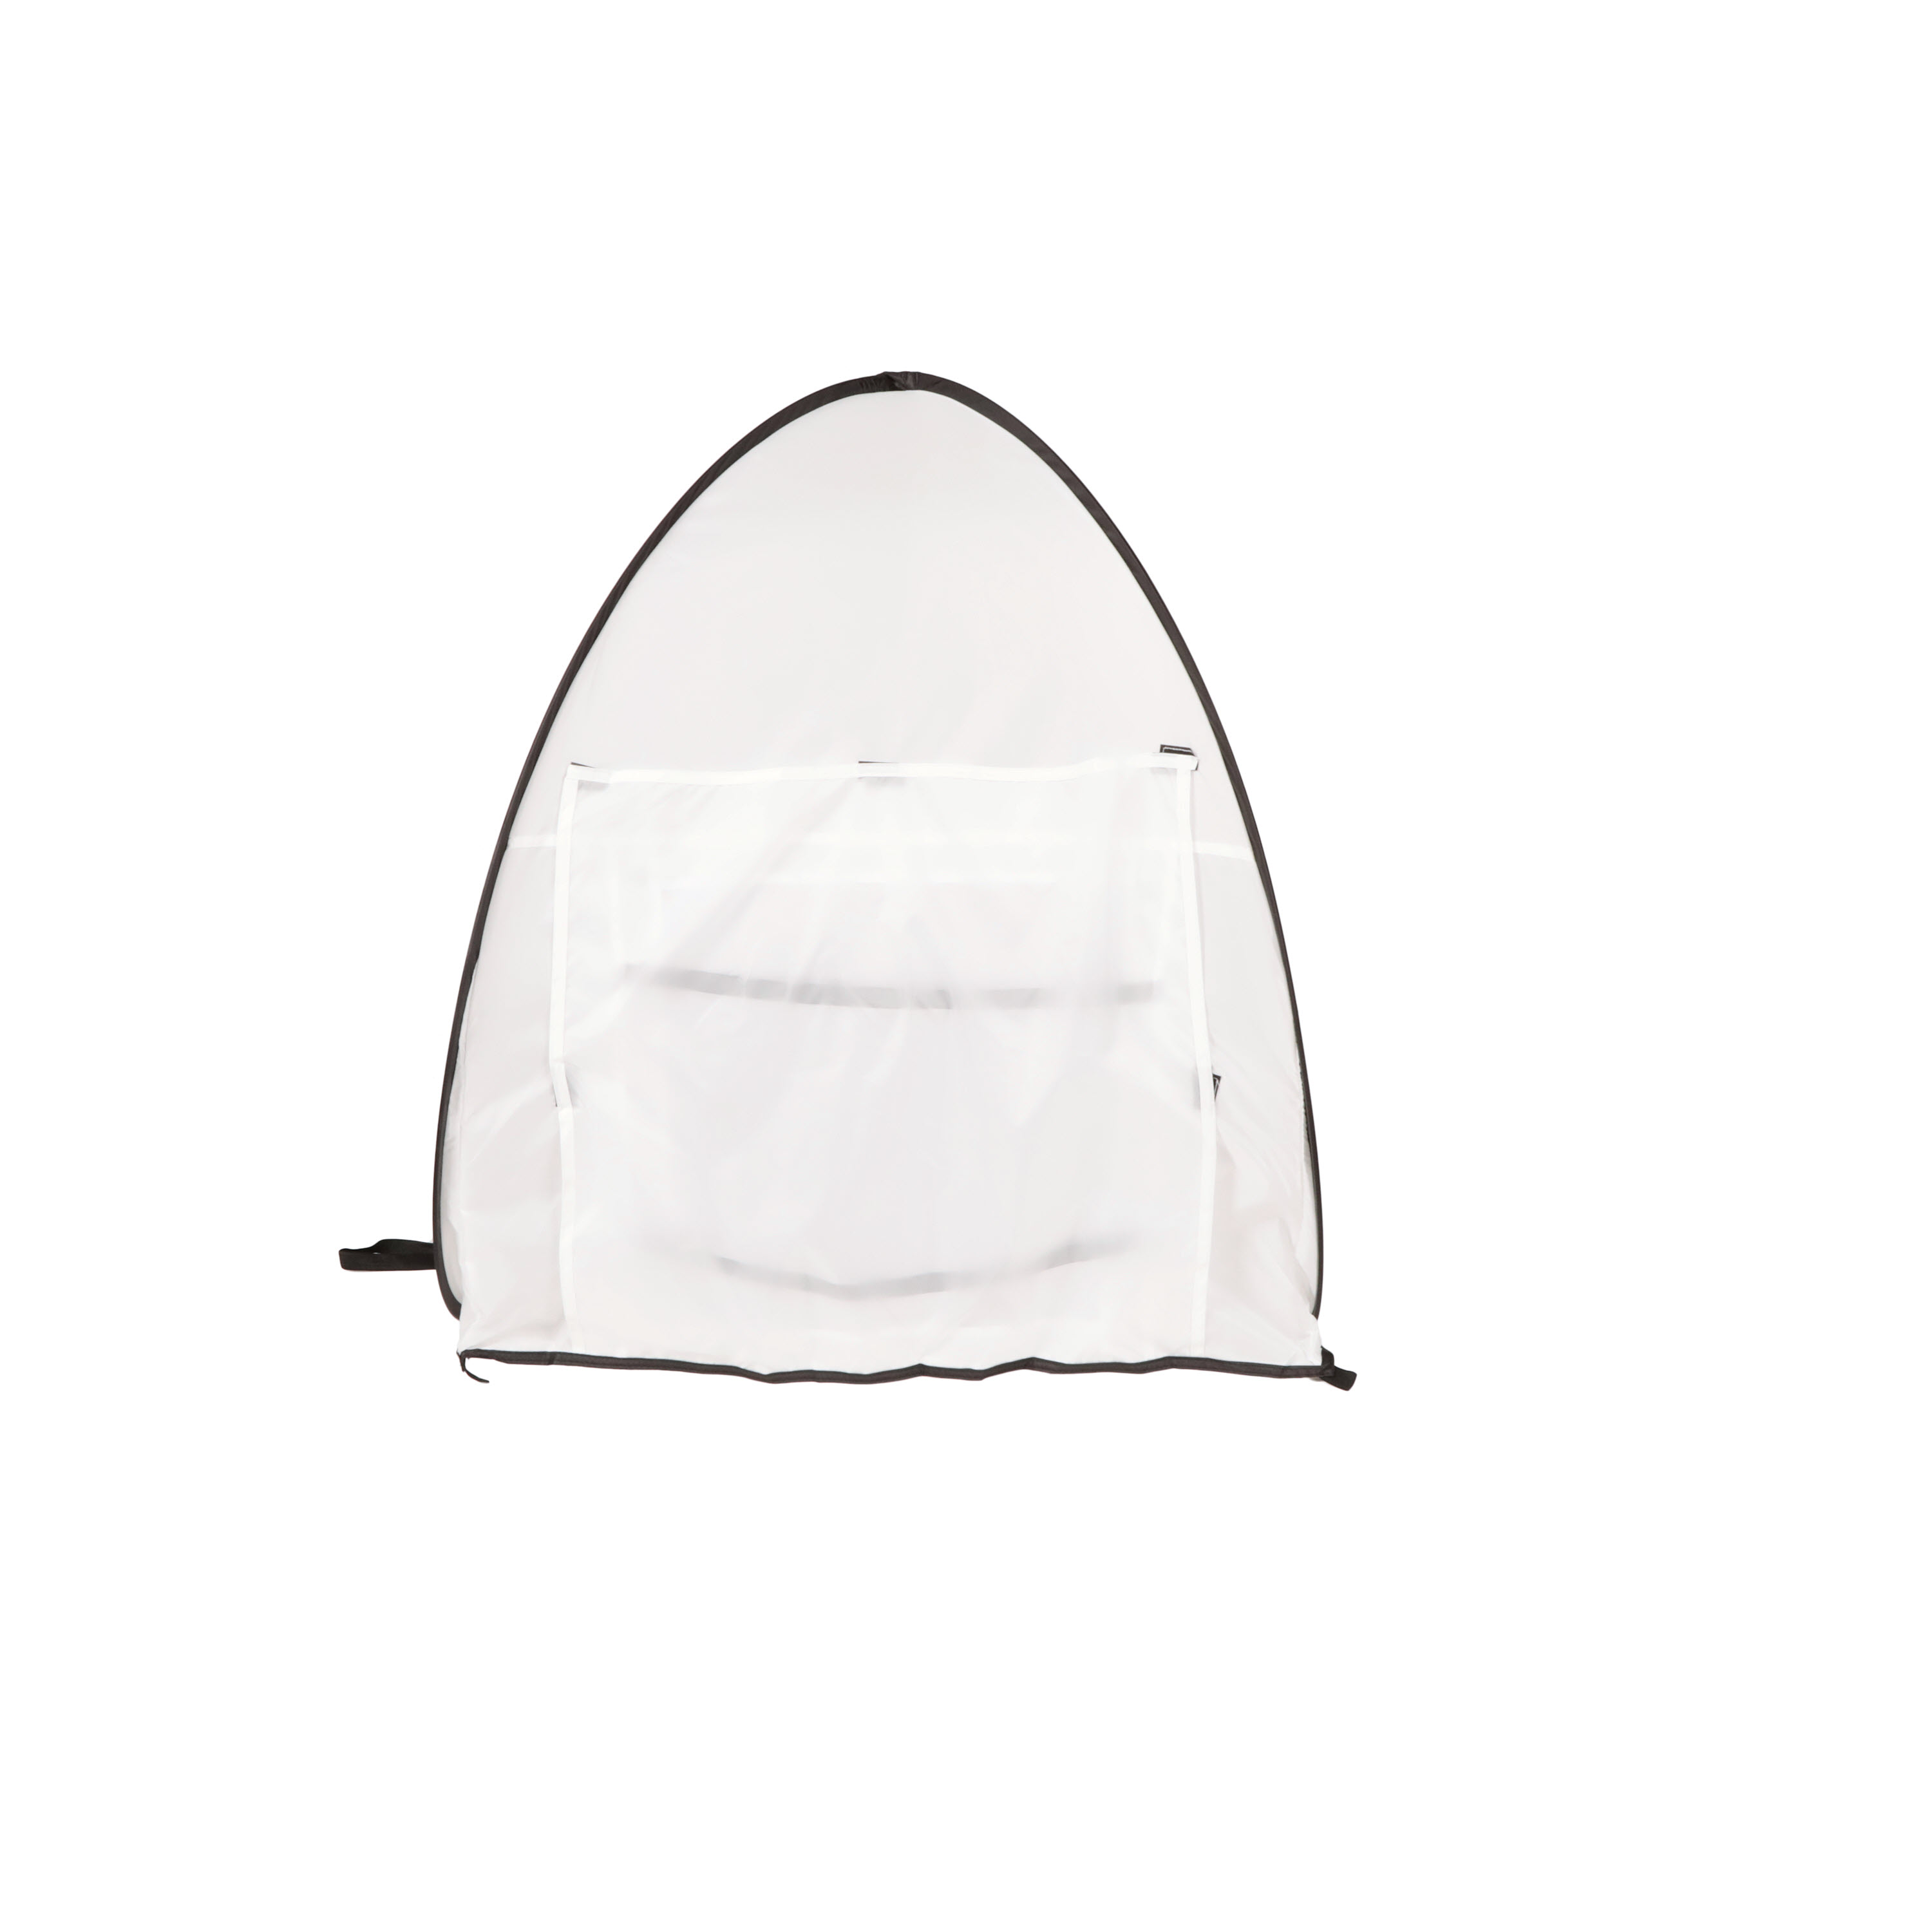 Wagner C900051 Spray Shelter - 2.9 x 2.5 White Polyester - Small